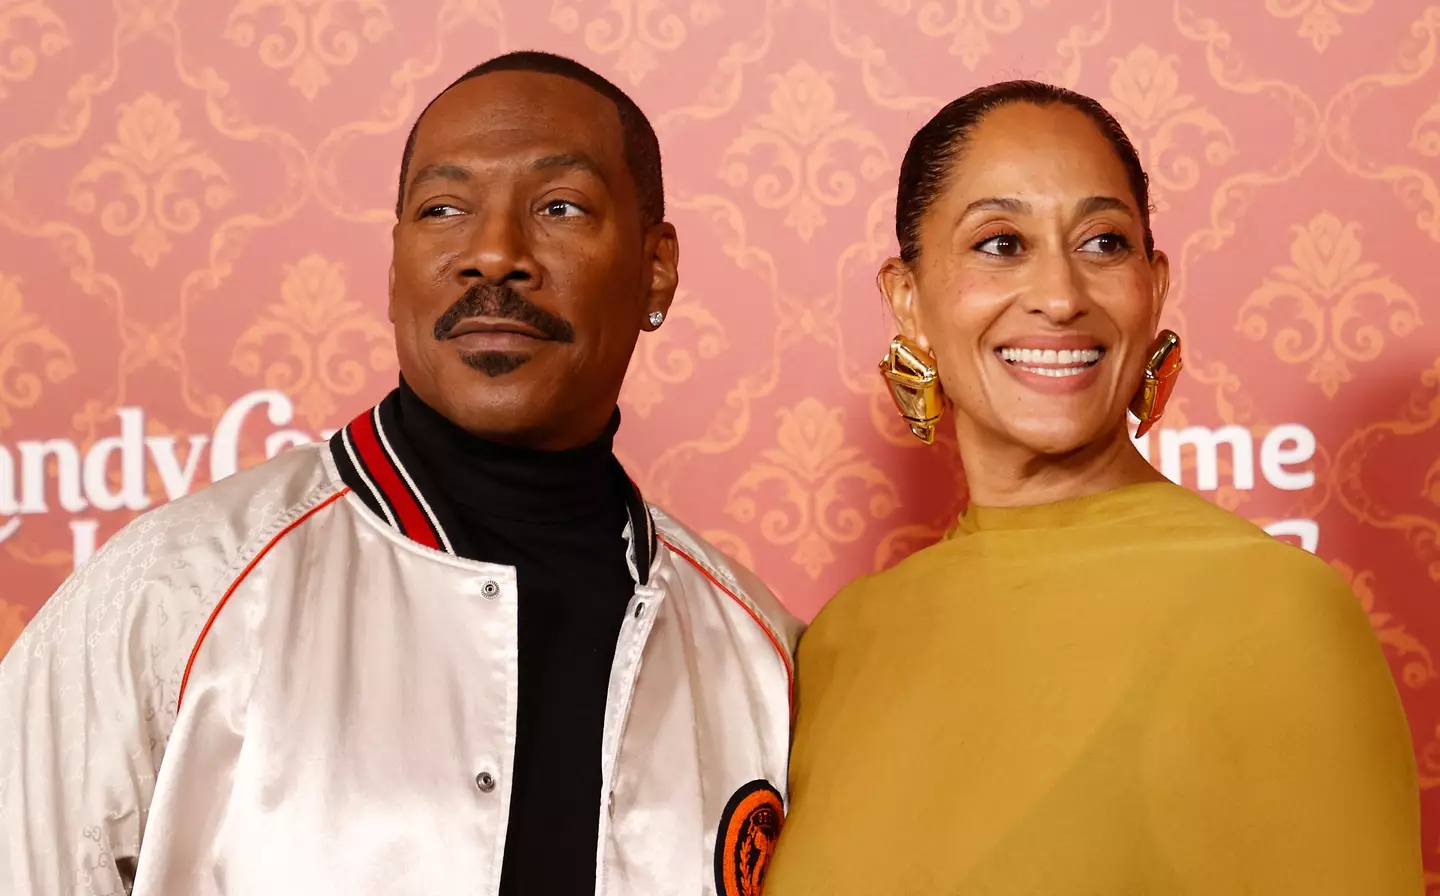 Murphy has a new festive film with Tracee Ellis Ross.